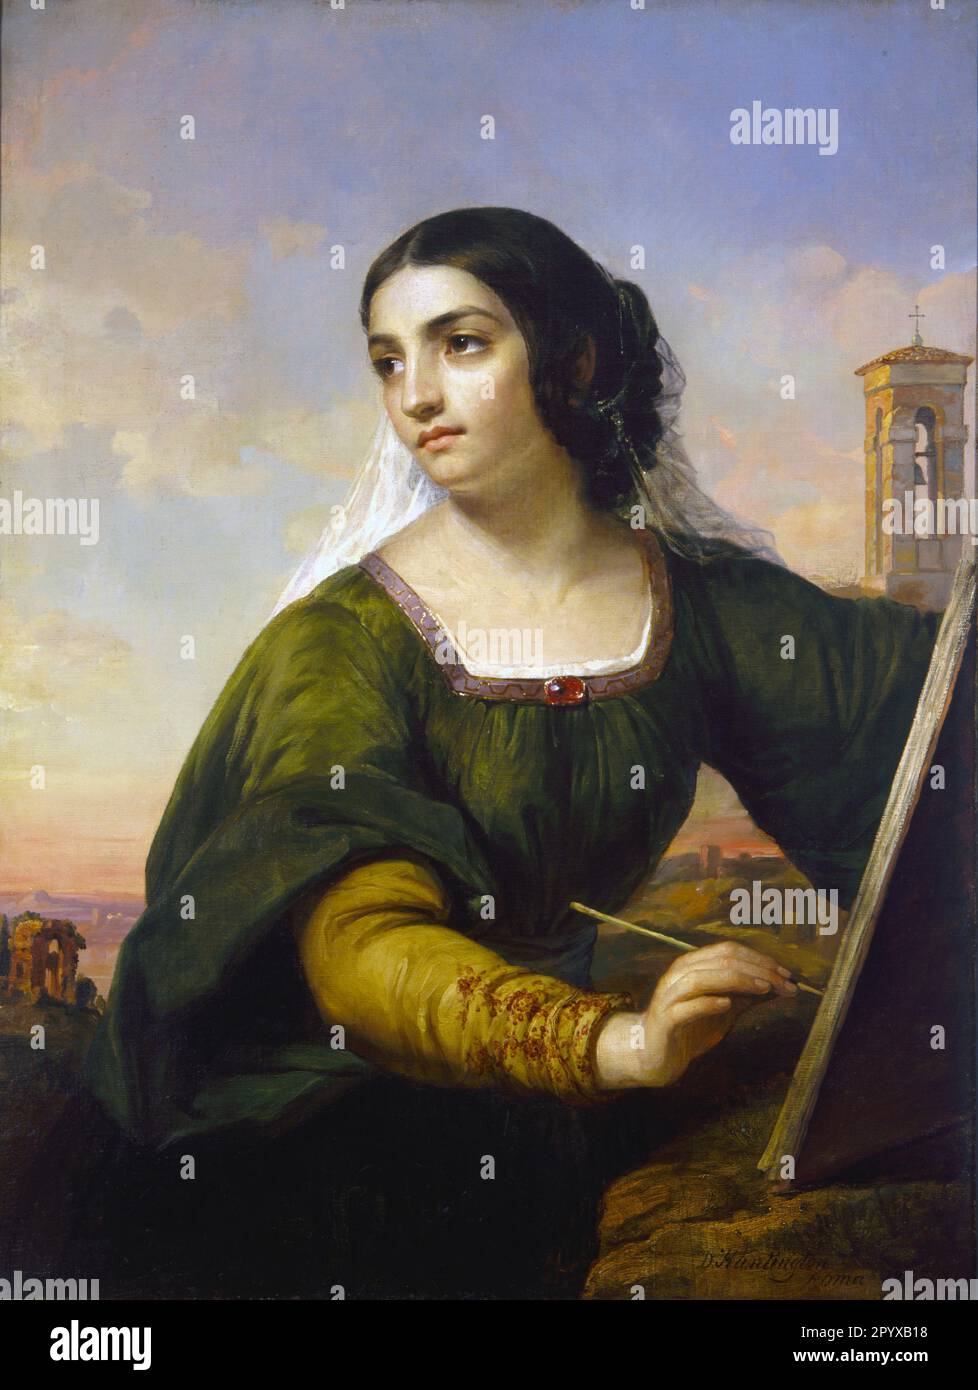 Italy - Daniel Huntington made many trips to Italy, where he was fascinated by the classical art and architecture. Many nineteenth-century American artists traveled to Italy to study the country's rich cultural history and to sharpen their skills as painters and sculptors. In this painting, Huntington personified Italy as a young woman holding a sketchbook and paintbrush. The distant ruins to the left of the image symbolize the country's rich past, while the Tuscan bell tower on the right represents the continuing influence of Catholicism. Female painters were rare during the nineteenth centur Stock Photo